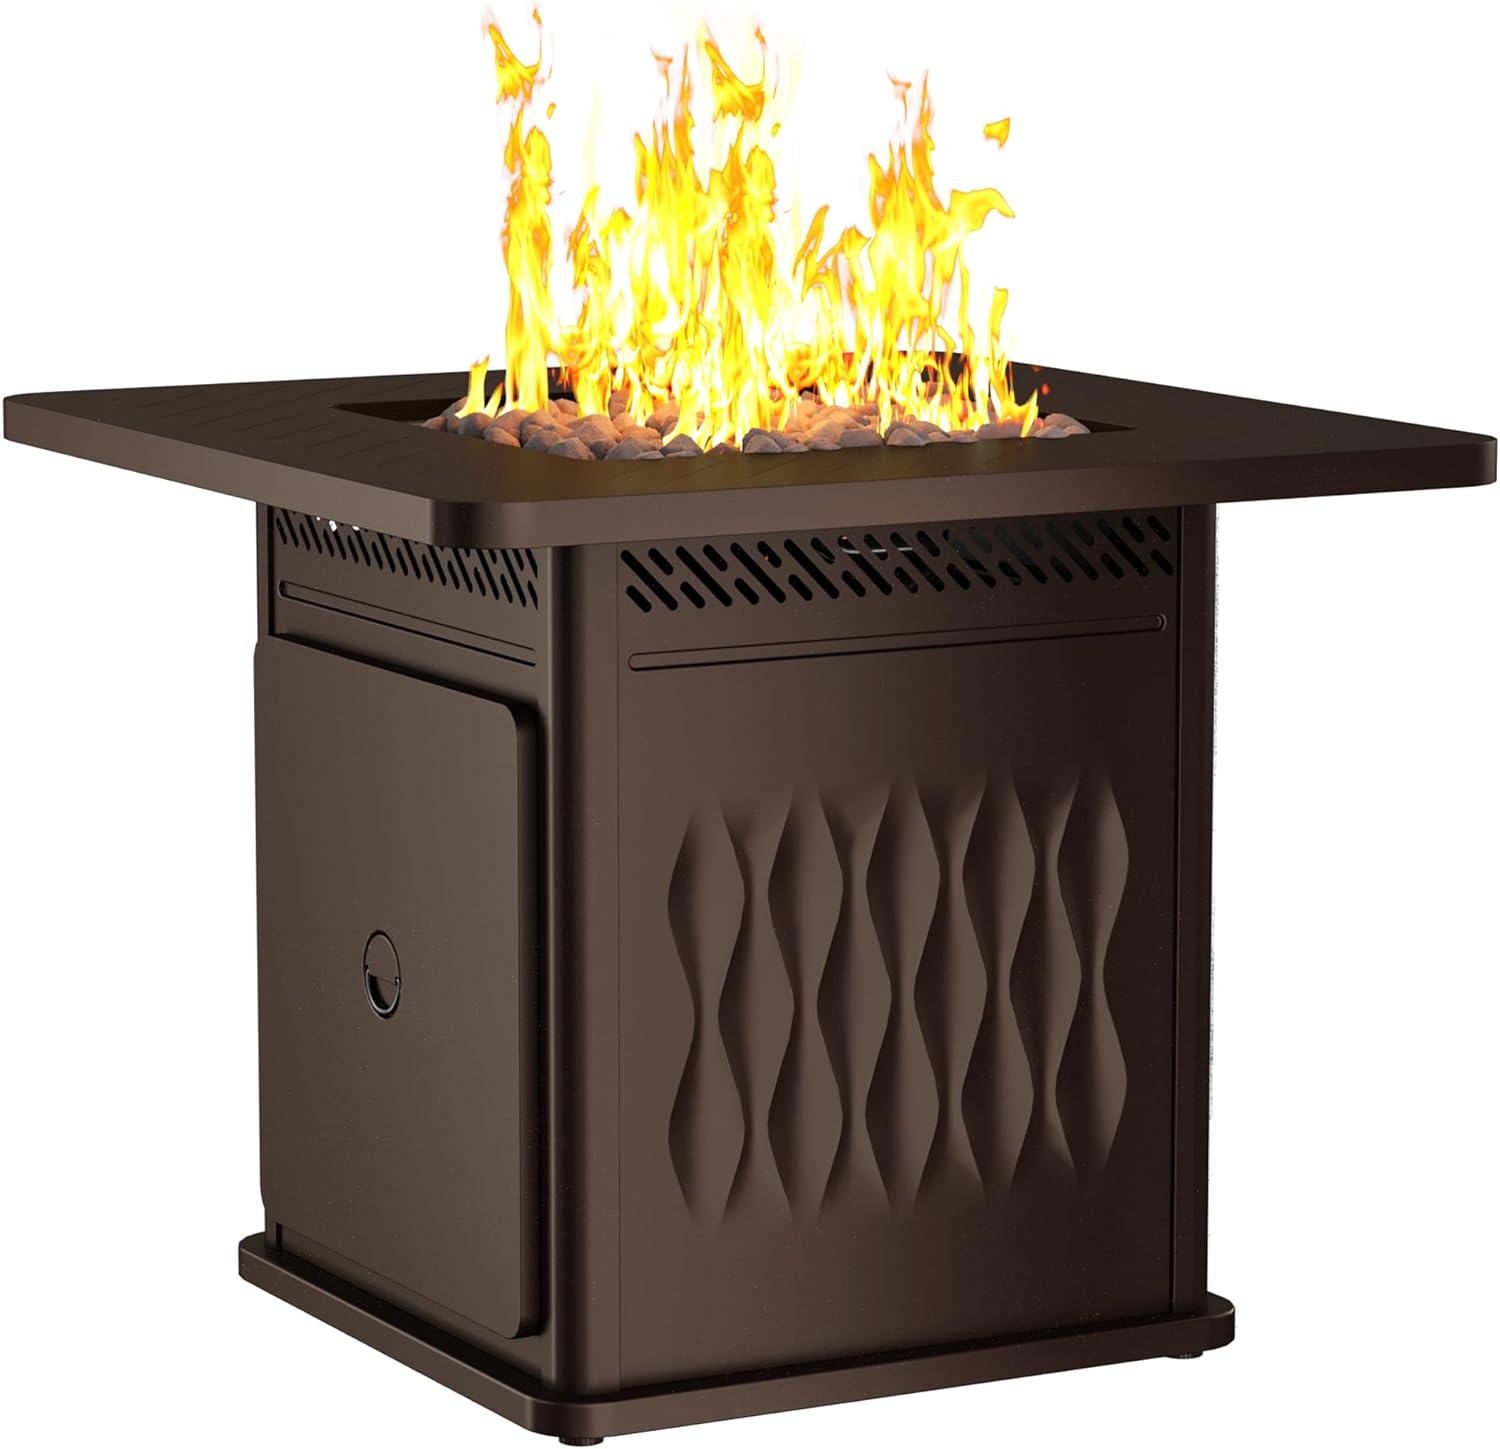 EAST OAK Propane Fire Pit Table Review